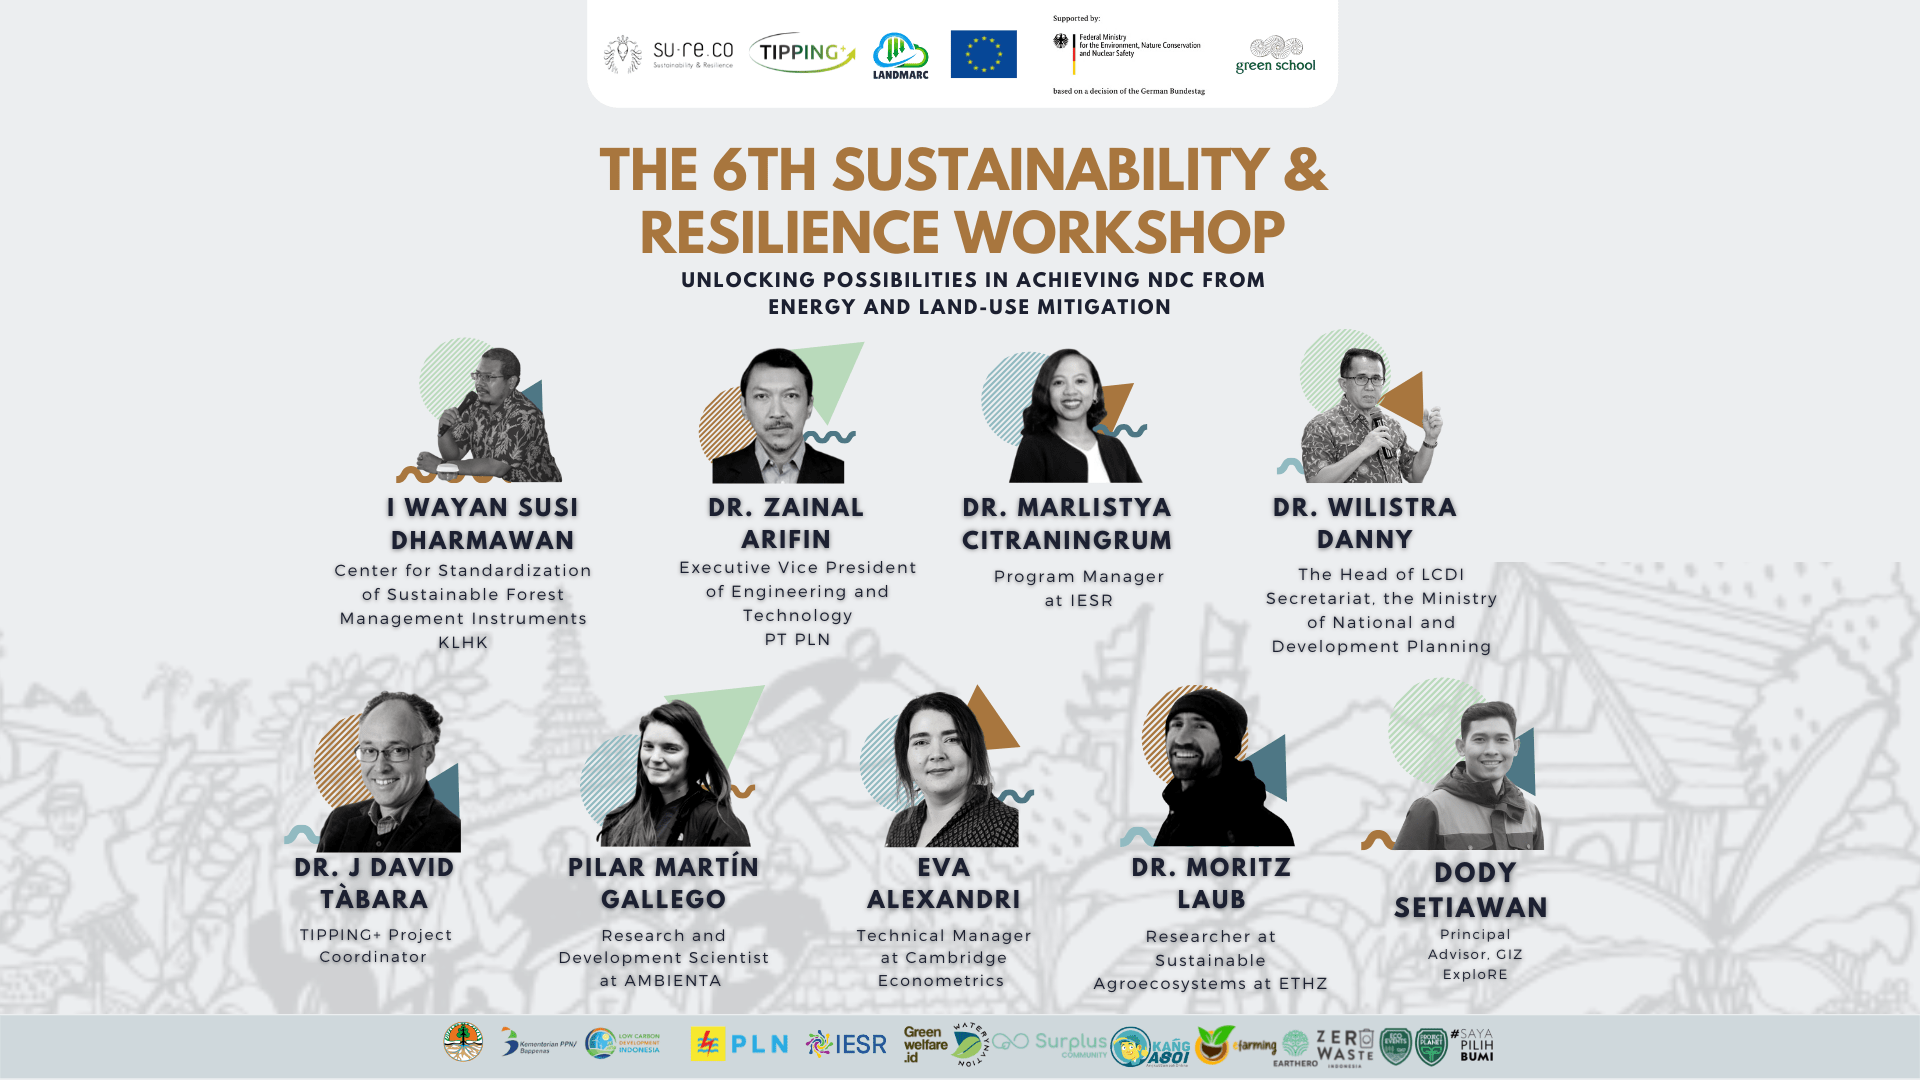 The Sixth Sustainability & Resilient workshop